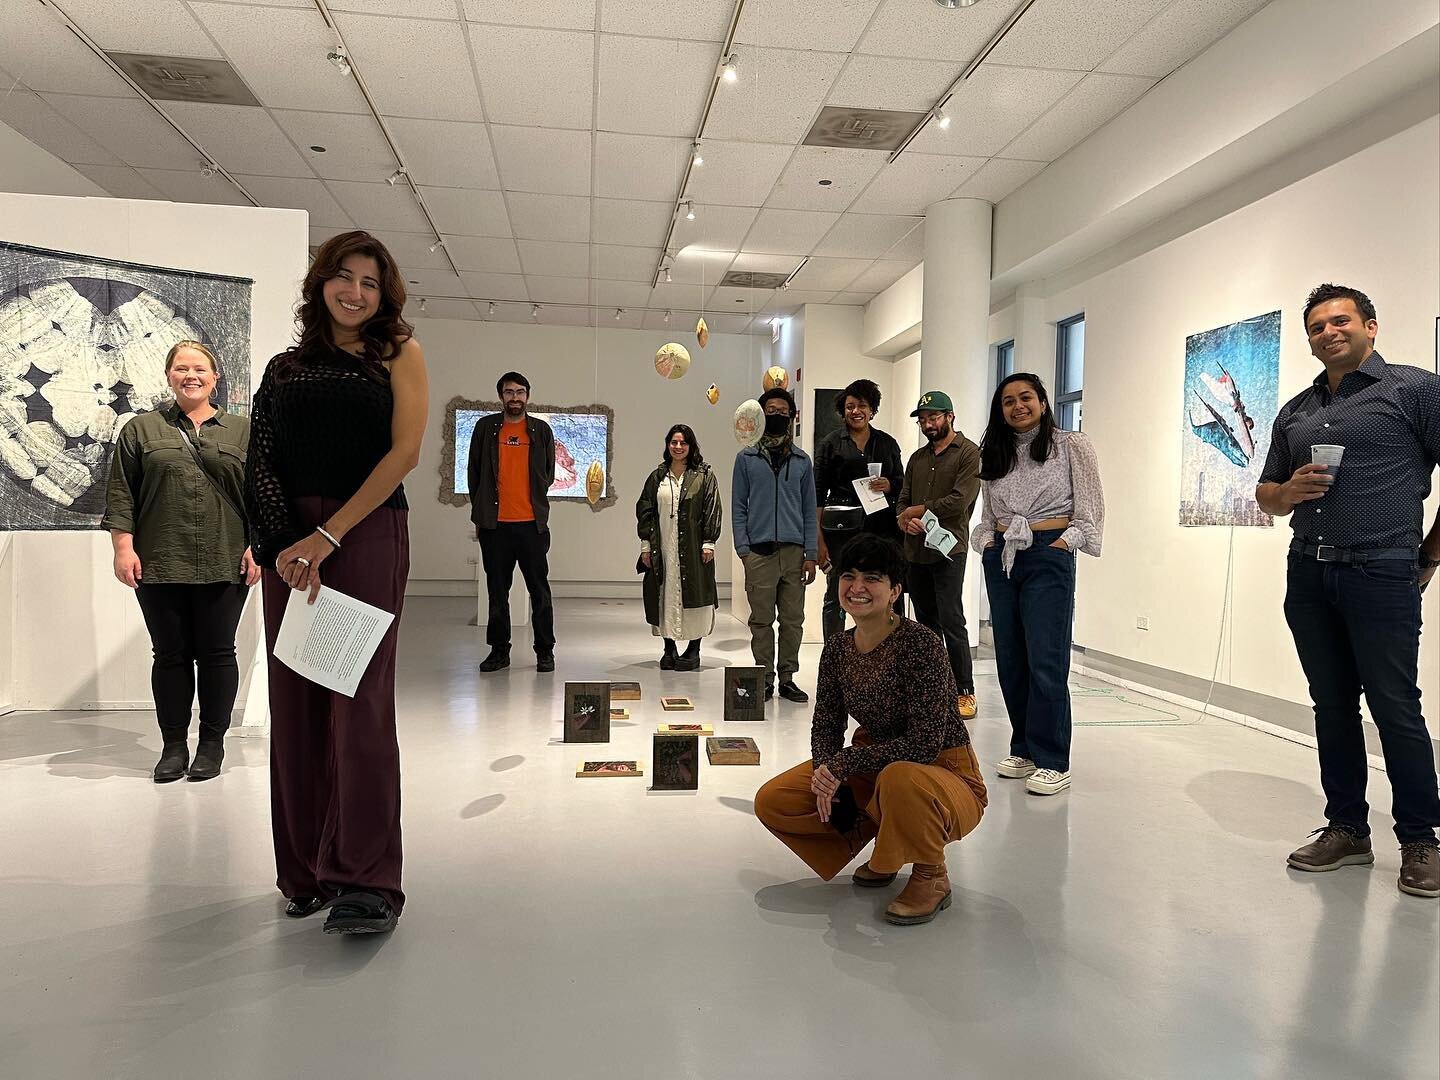 Thank you all for coming for the opening of Where She Comes From curated by @pia_singh9 with works by 
@fewfalax @nehapuridhir @ashwinibhat @janhavi_khemka 
The exhibition is open until 28th October @neiu_fineartscentergallery.

Installing the show a